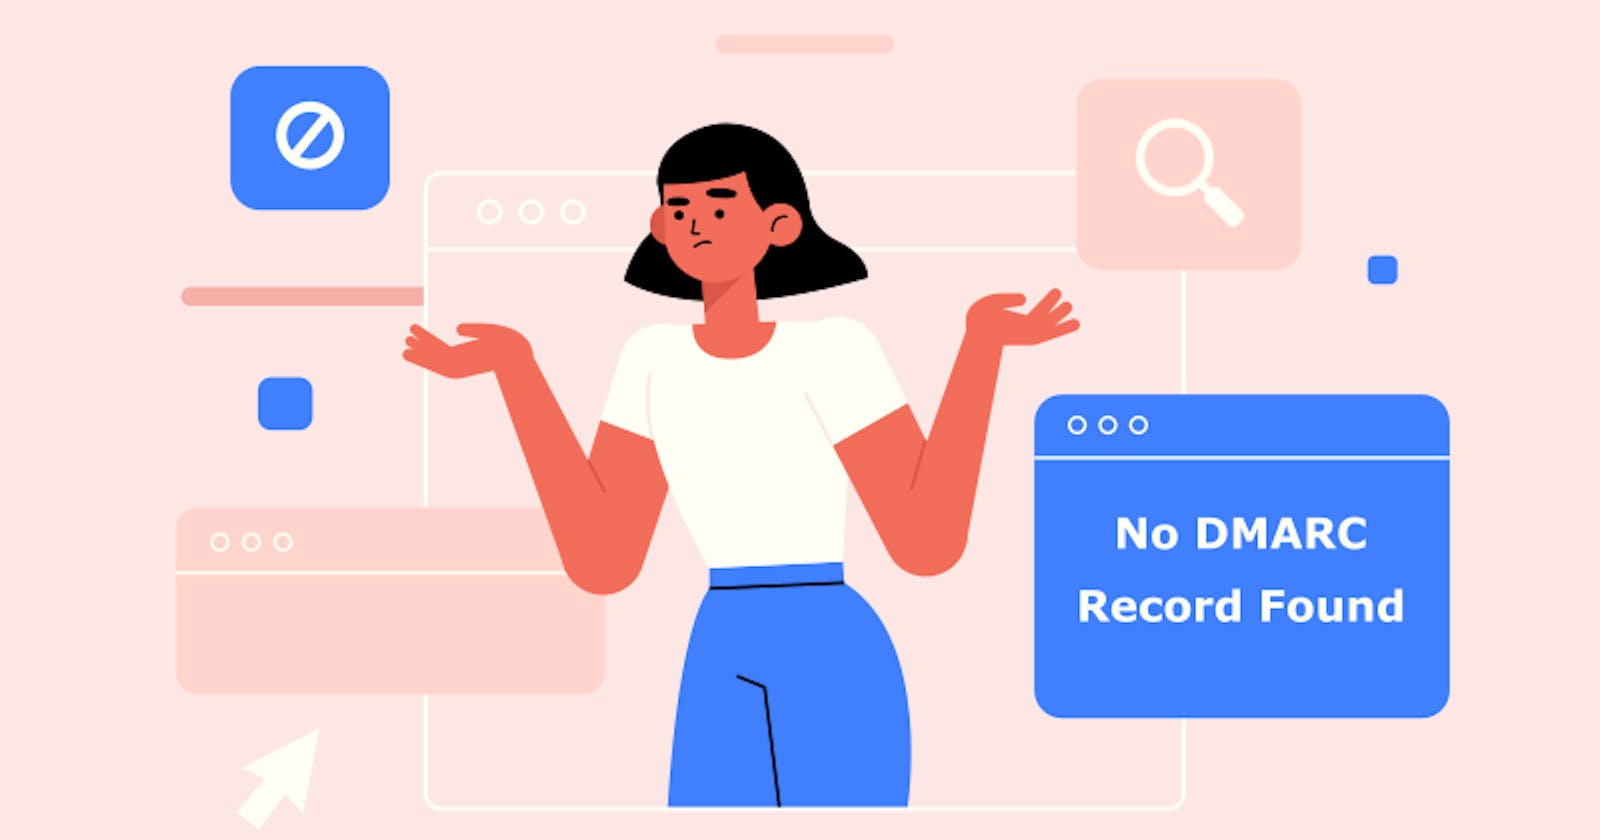 How to fix "No DMARC Record Found"